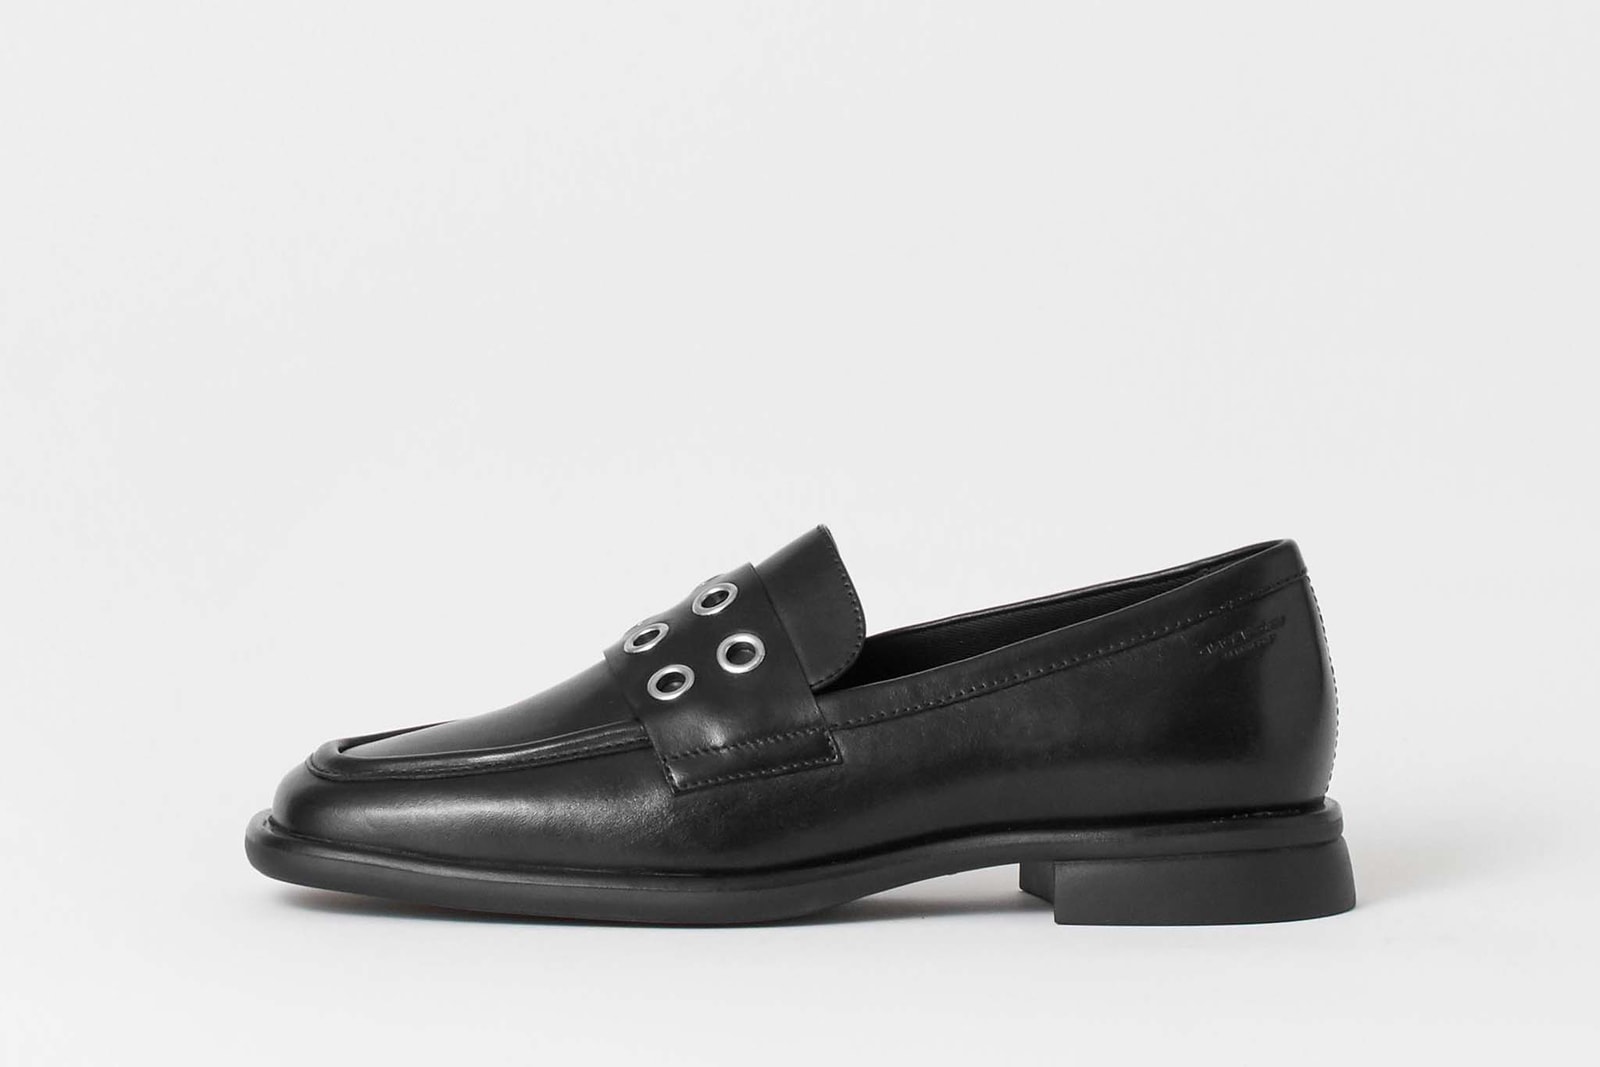 Vagabond Shoemakers’ AW22 Collection Highlights The 